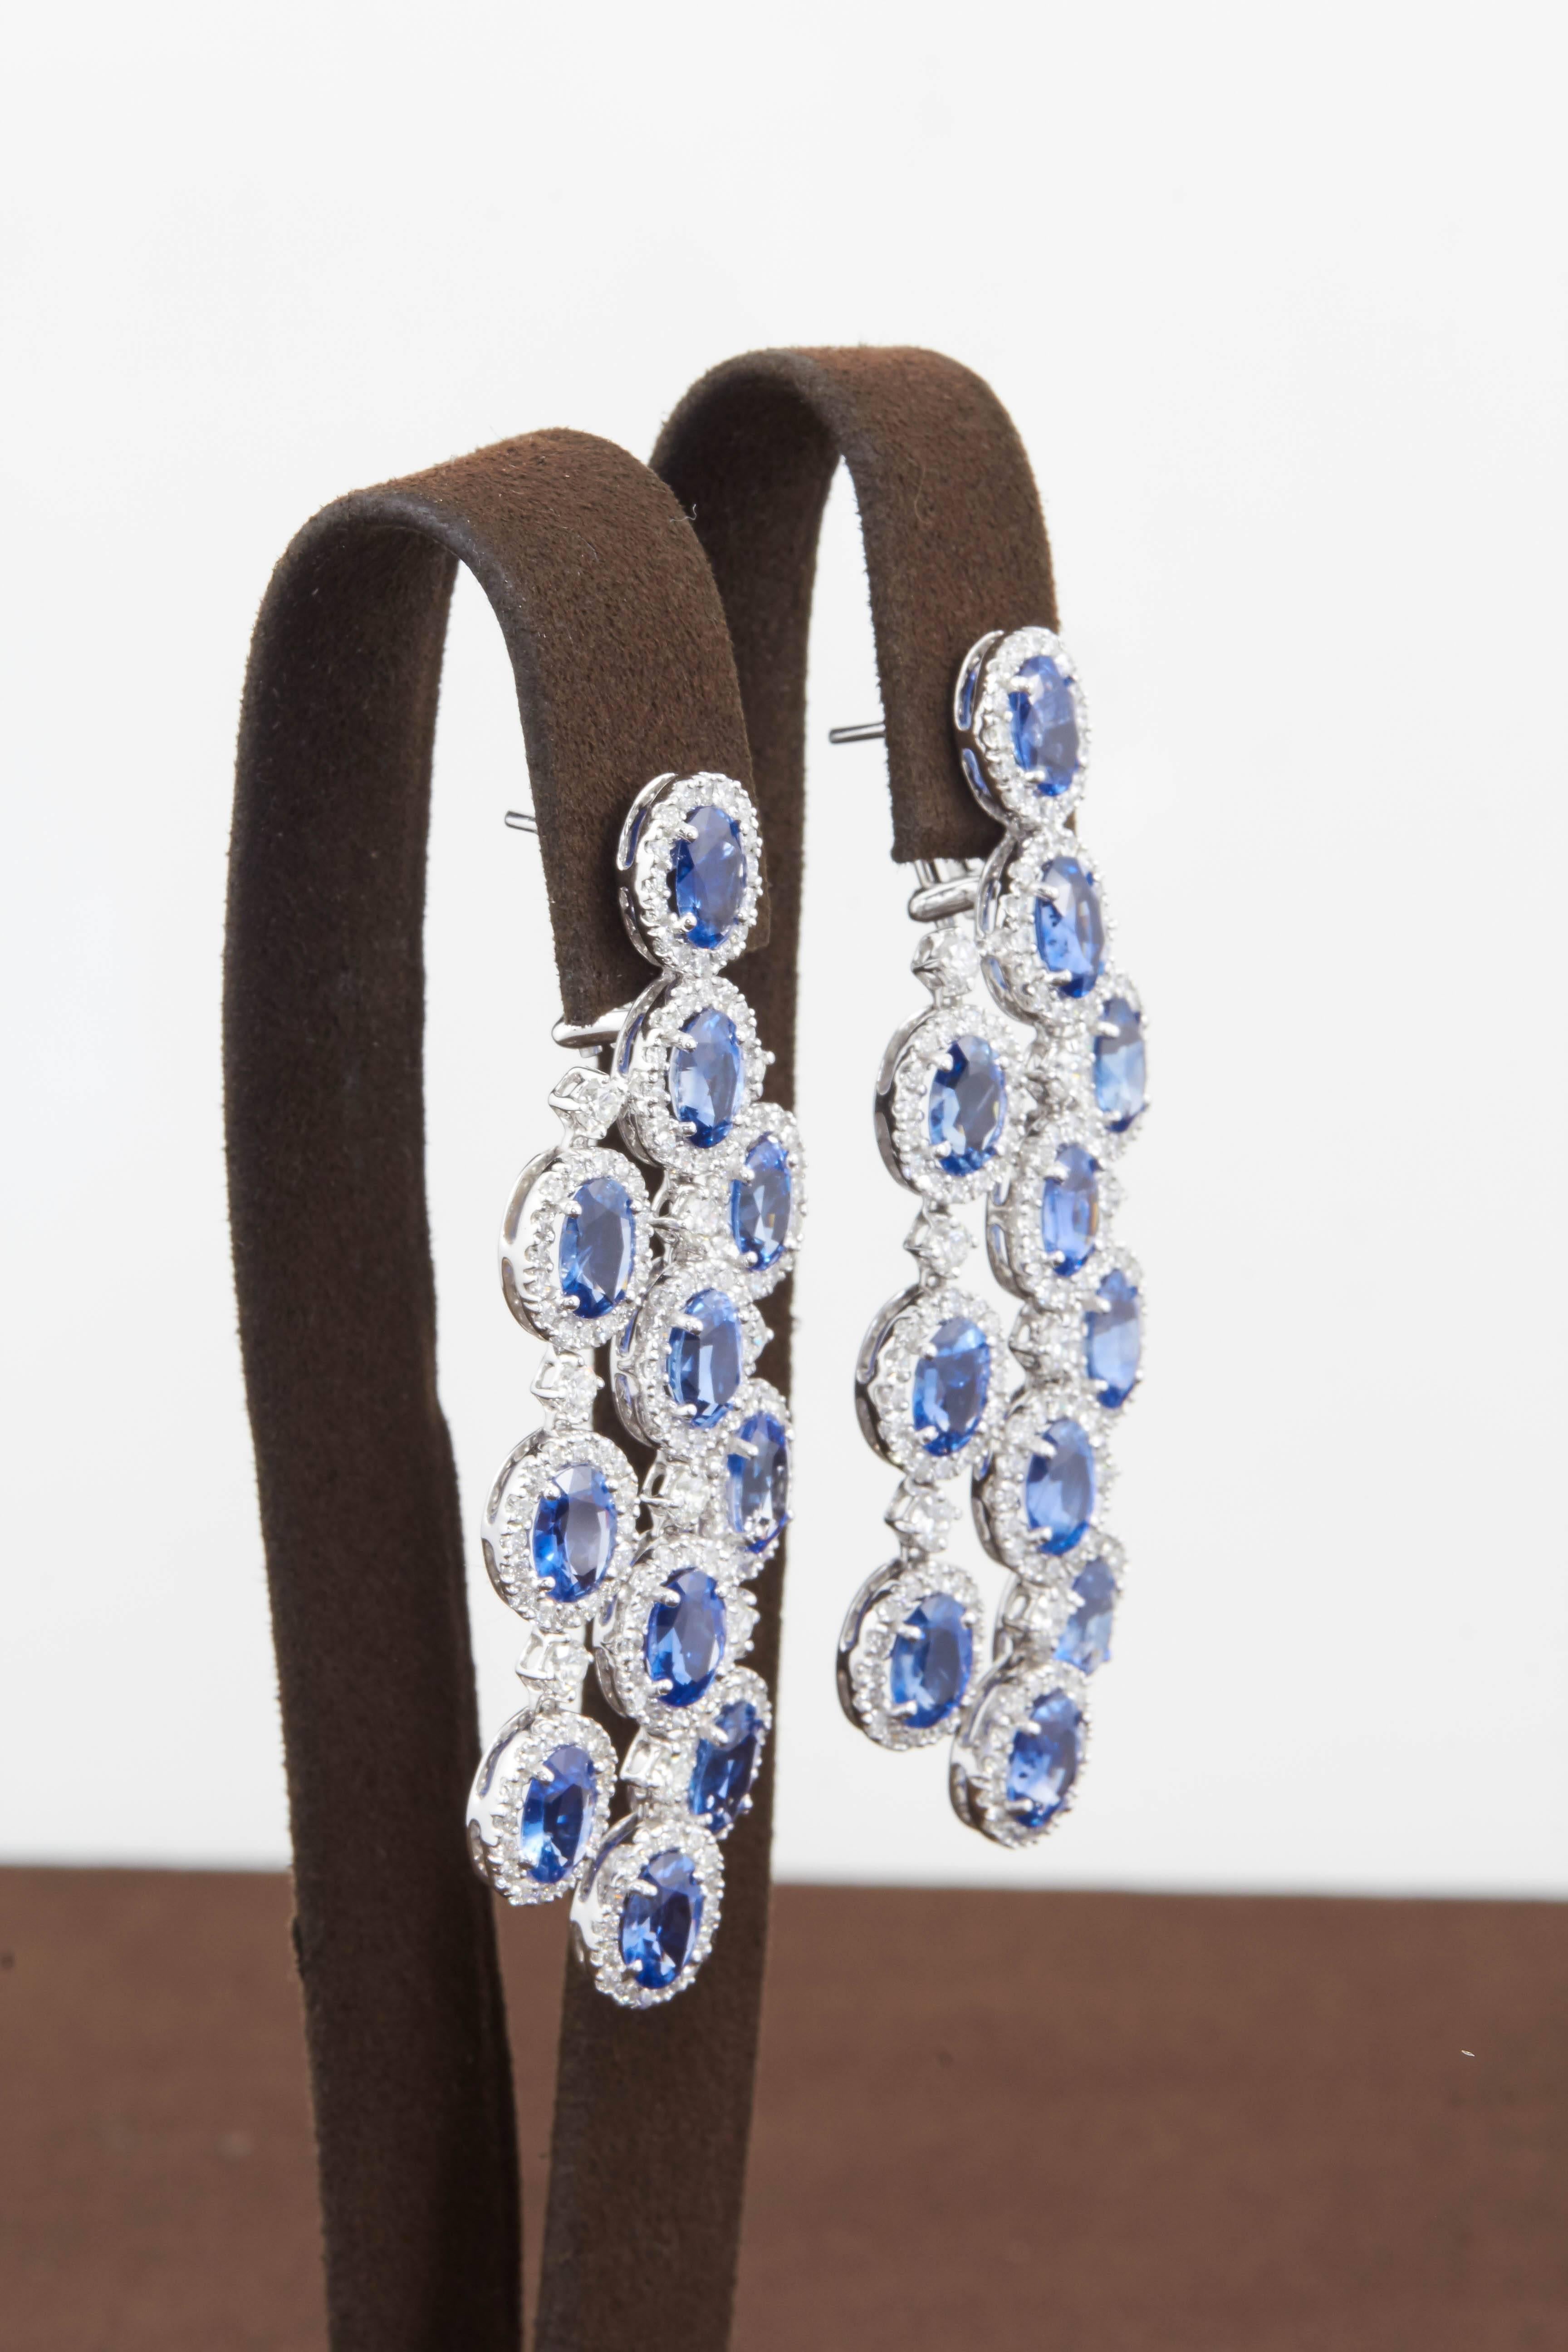 

A gorgeous pair of sapphire and diamond earrings.

24.05 carats of fine oval shaped blue Ceylon sapphires

6.68 carats of G color VS clarity diamonds

18k white gold

Approximately 2.5 inches long, .85 inches wide. 

A very wearable design, can be